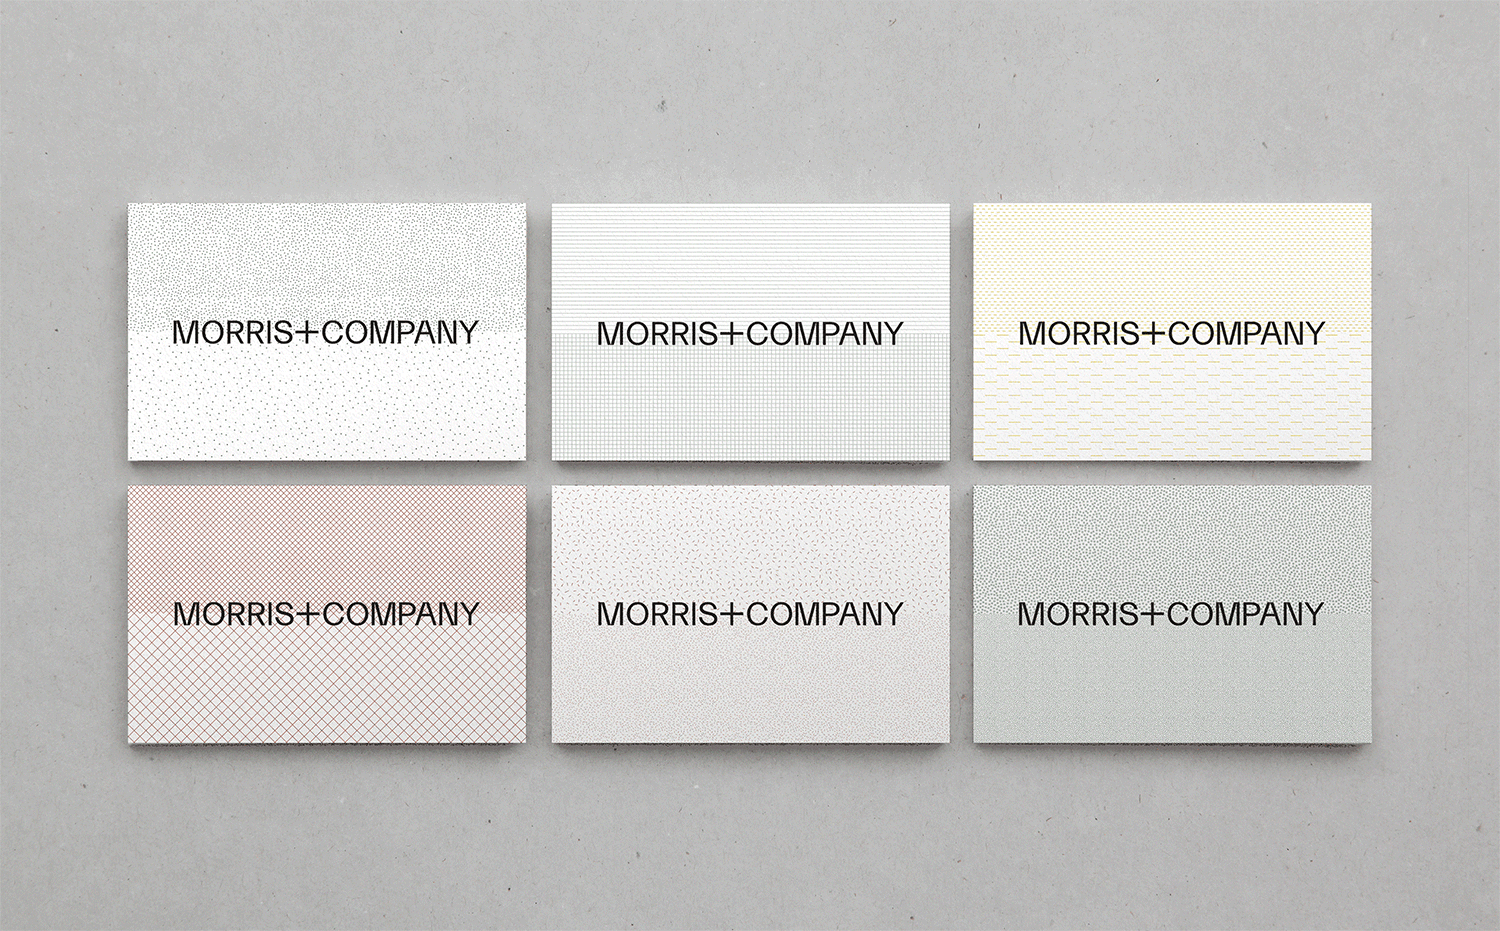 Architect Business Cards – Morris+Company by Bob Design